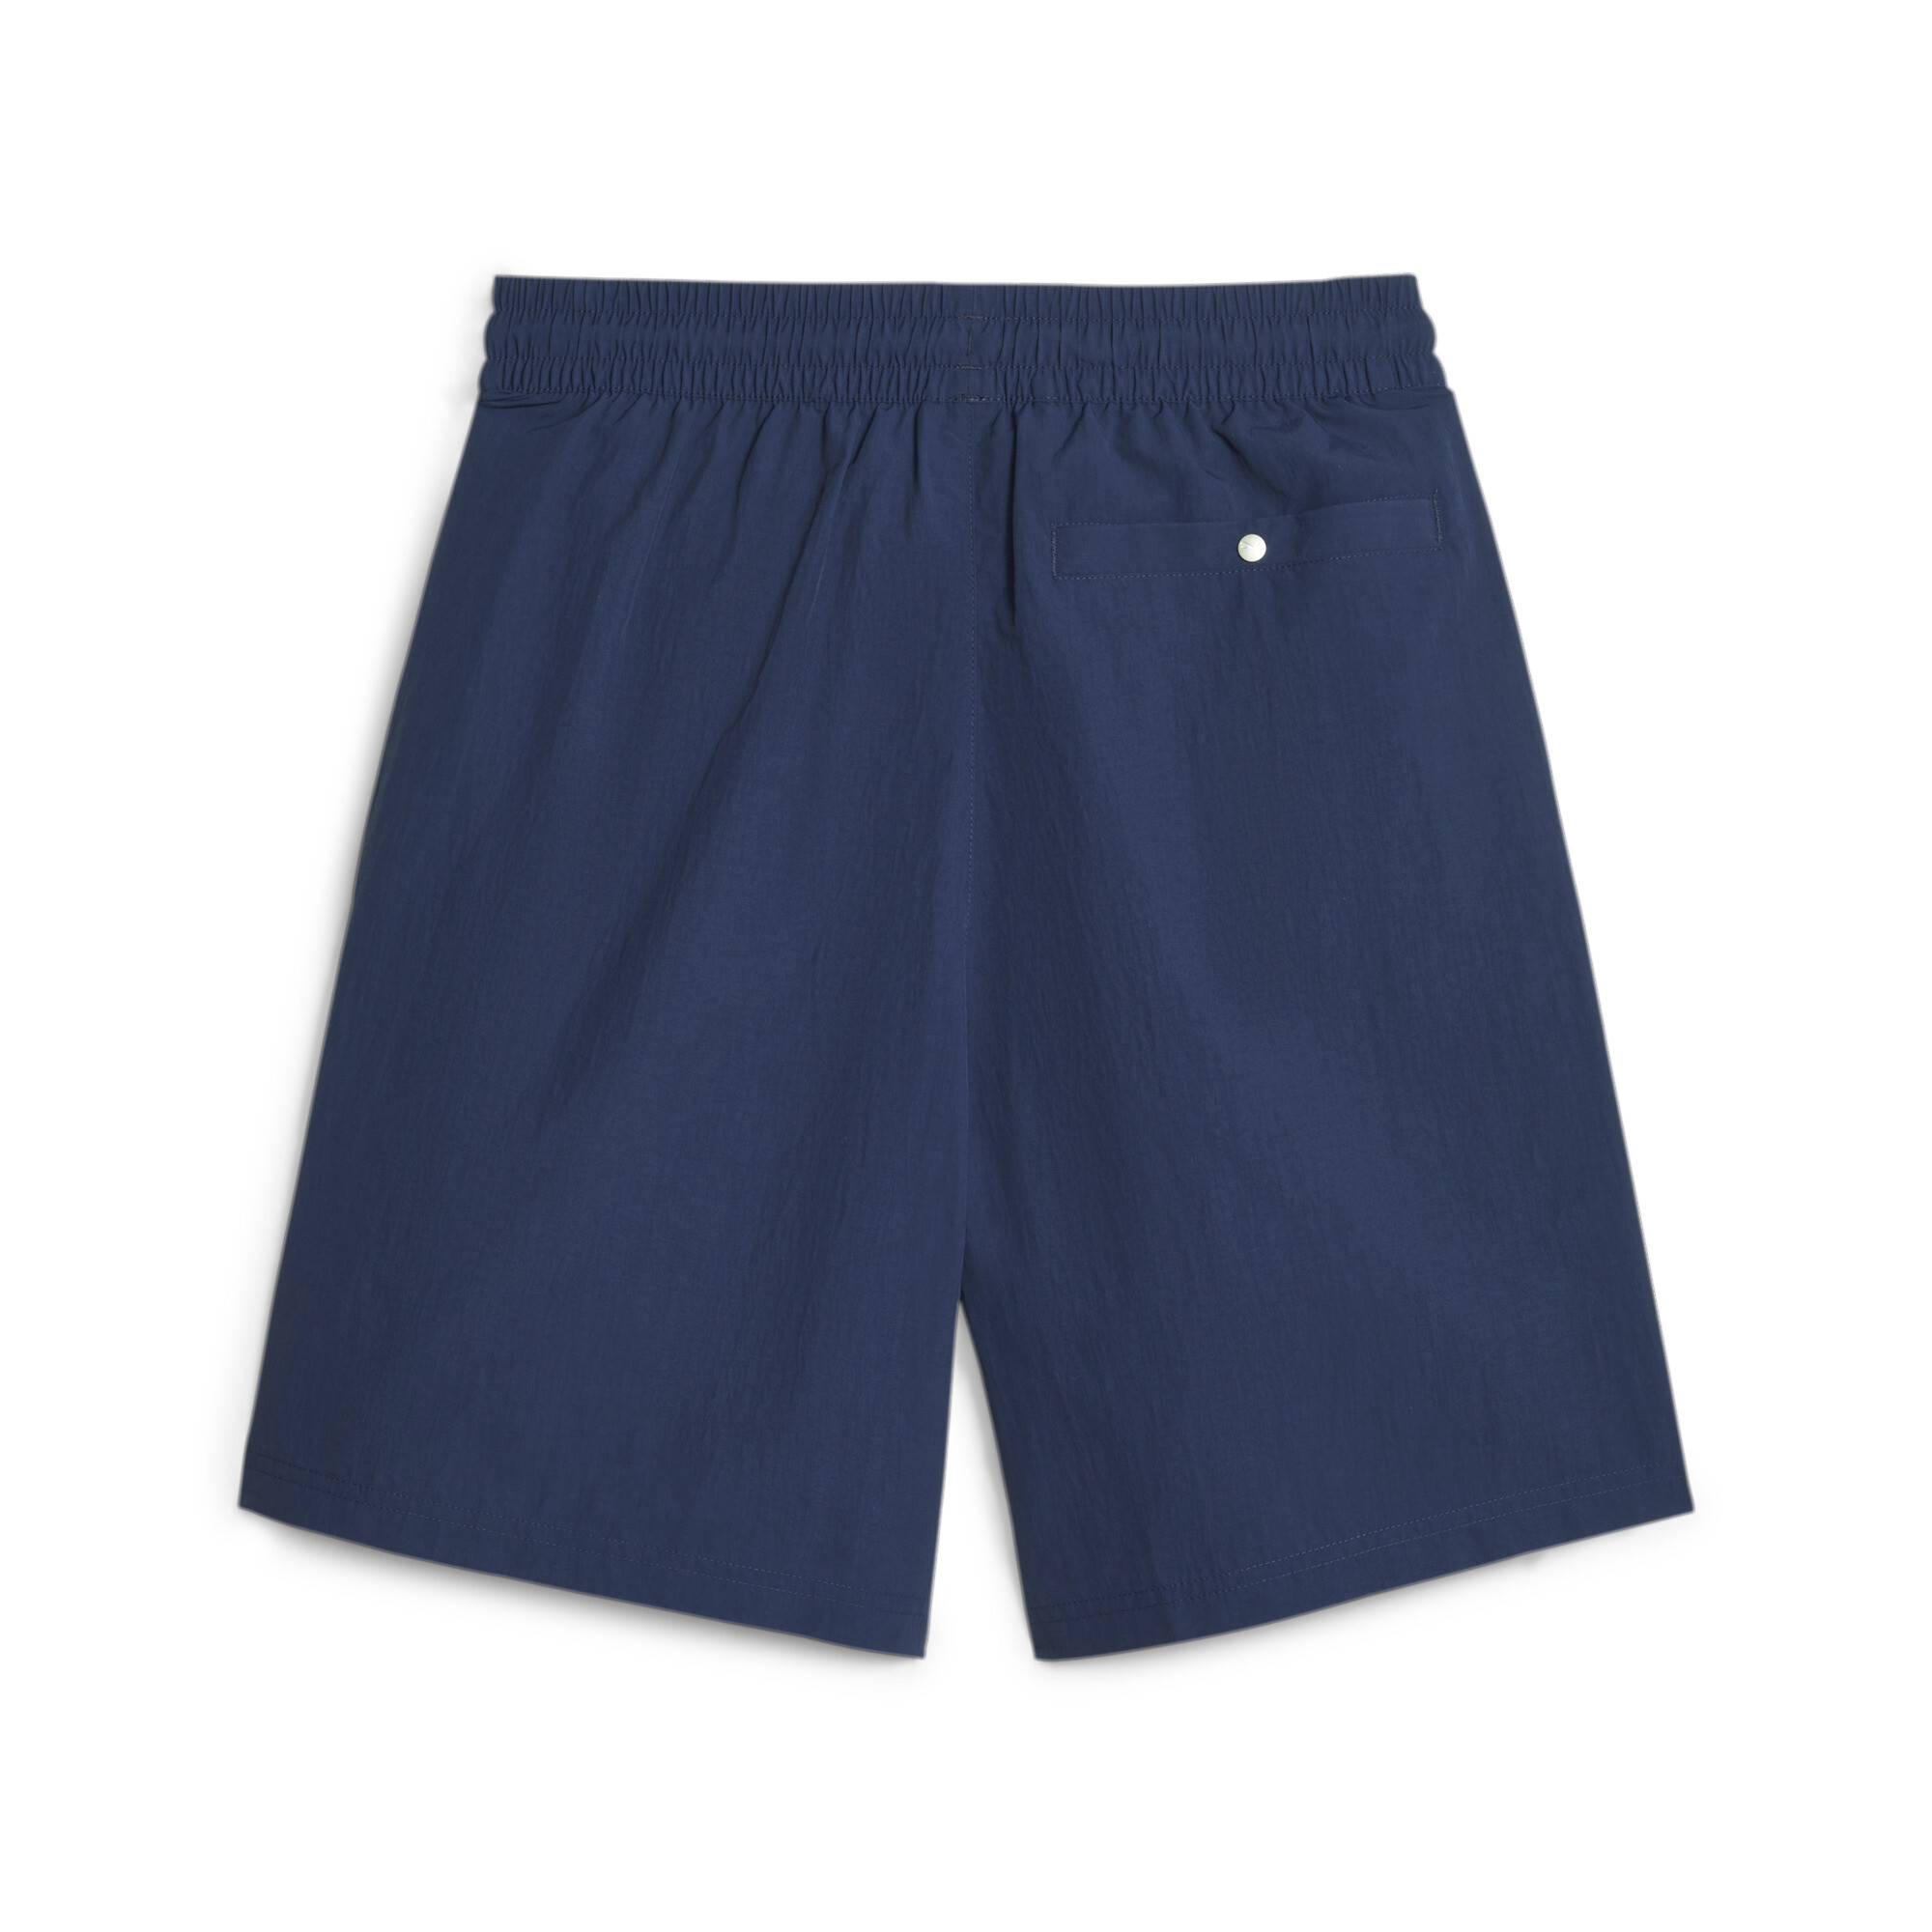 Men's PUMA TEAM Relaxed Shorts In Blue, Size 2XL